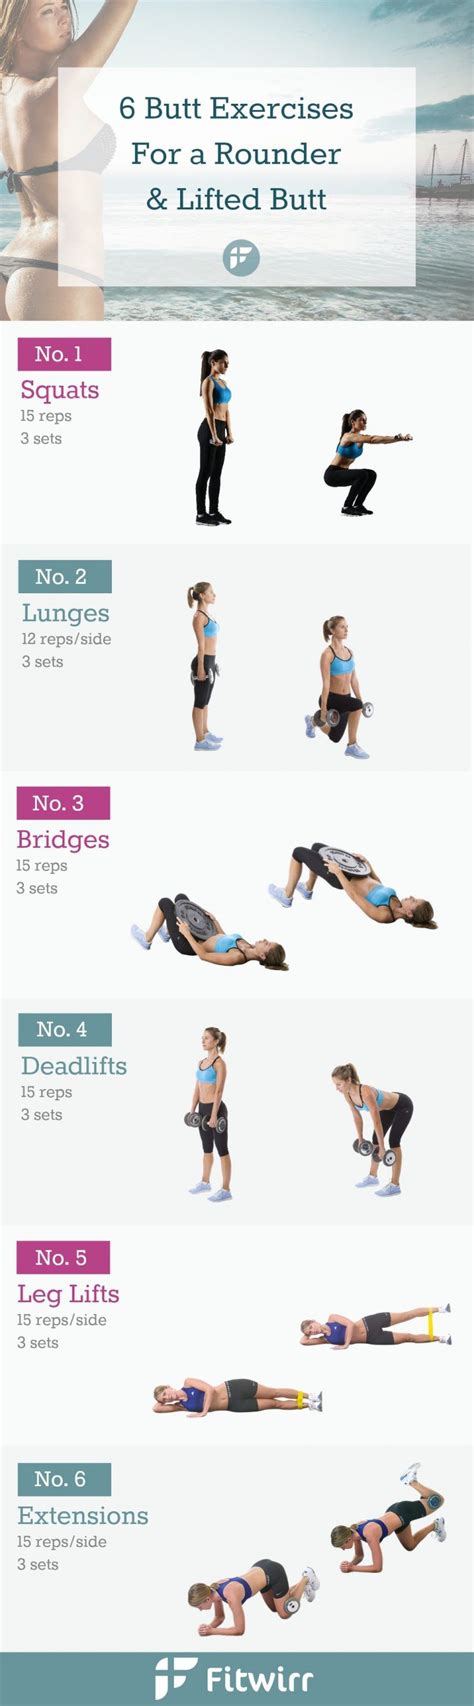 Workout Exercises 50 Intense Booty Workouts That Will Give You A